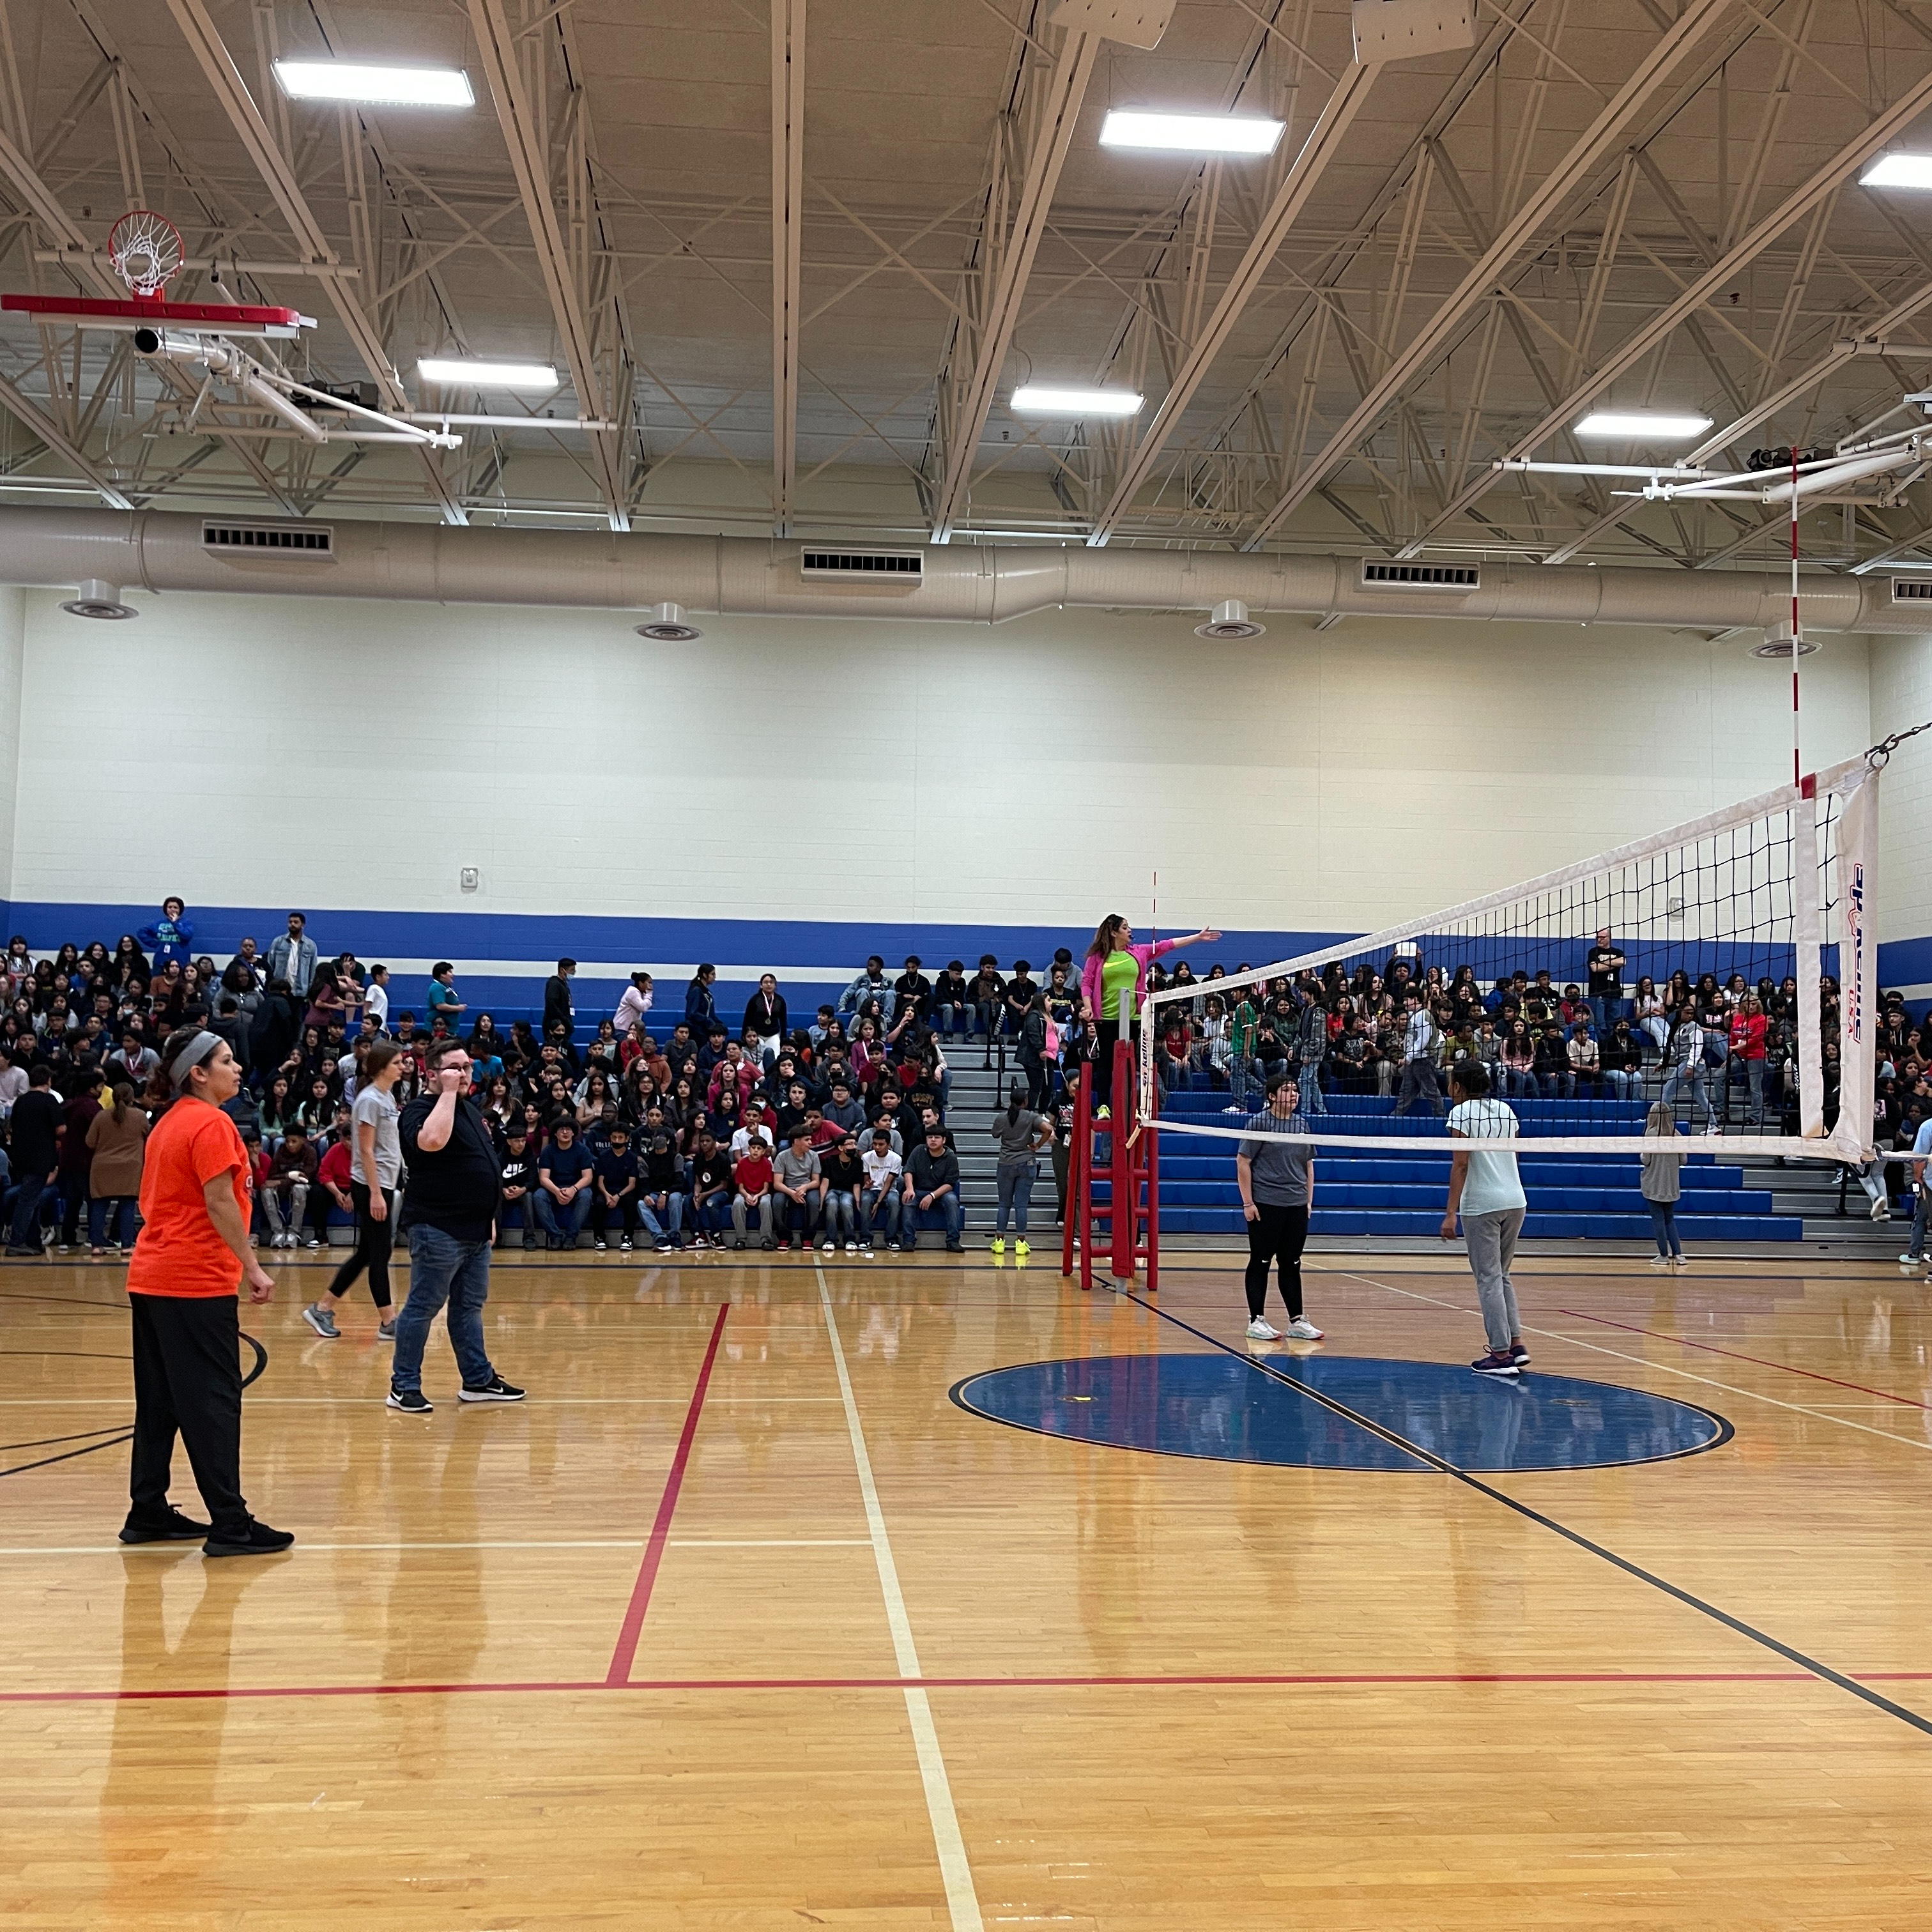 Staff vs Students Volleyball Game